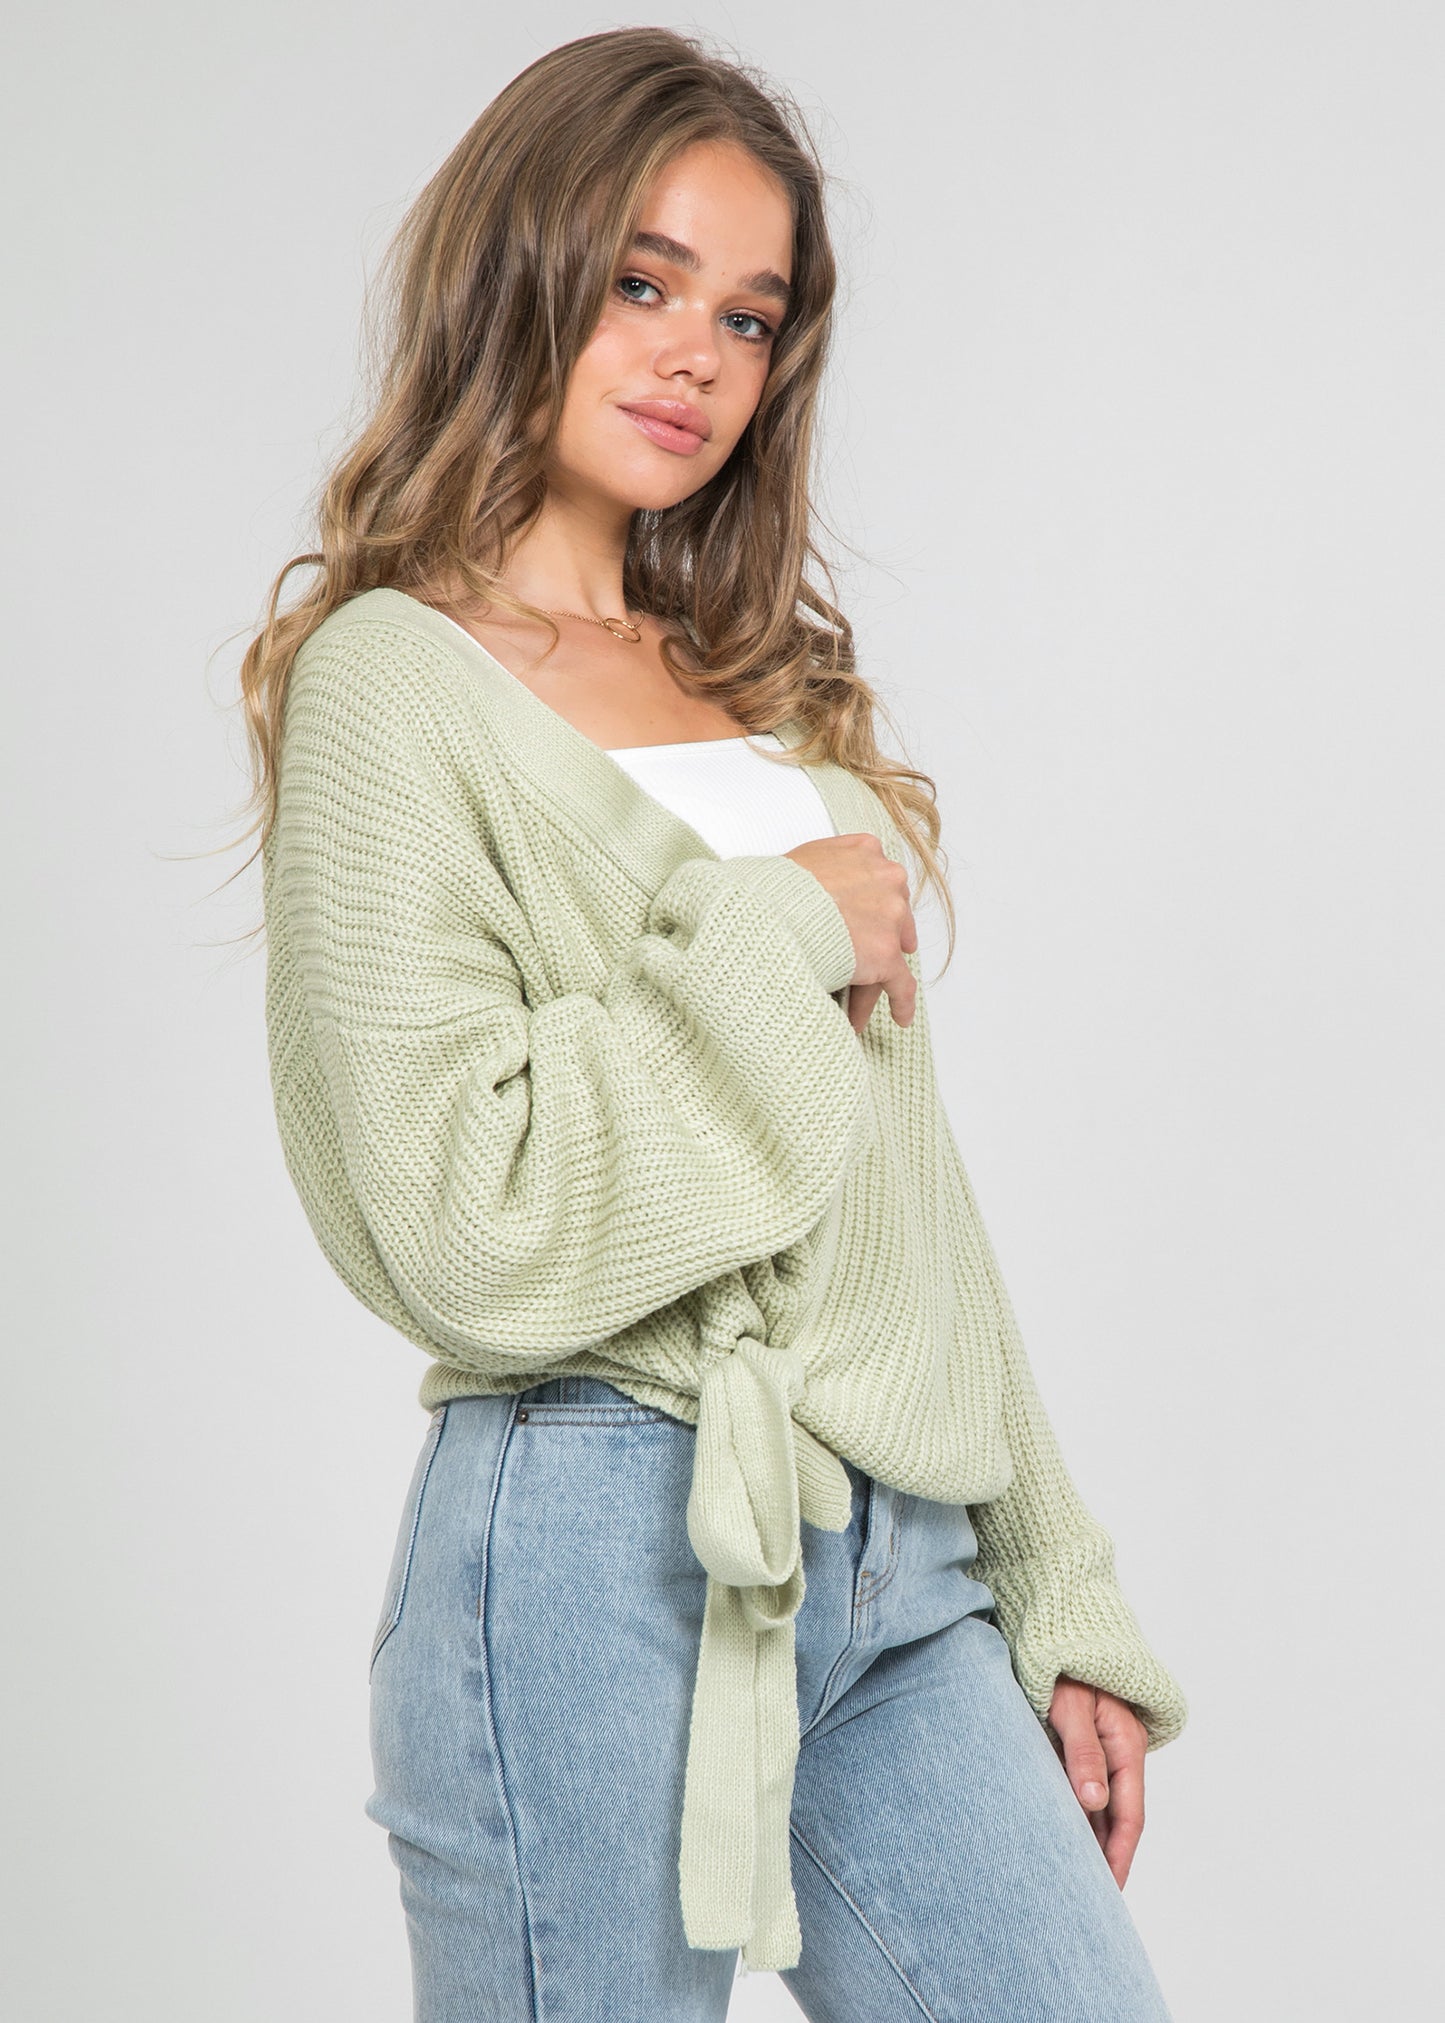 Wrap cardigan with tie front in light green